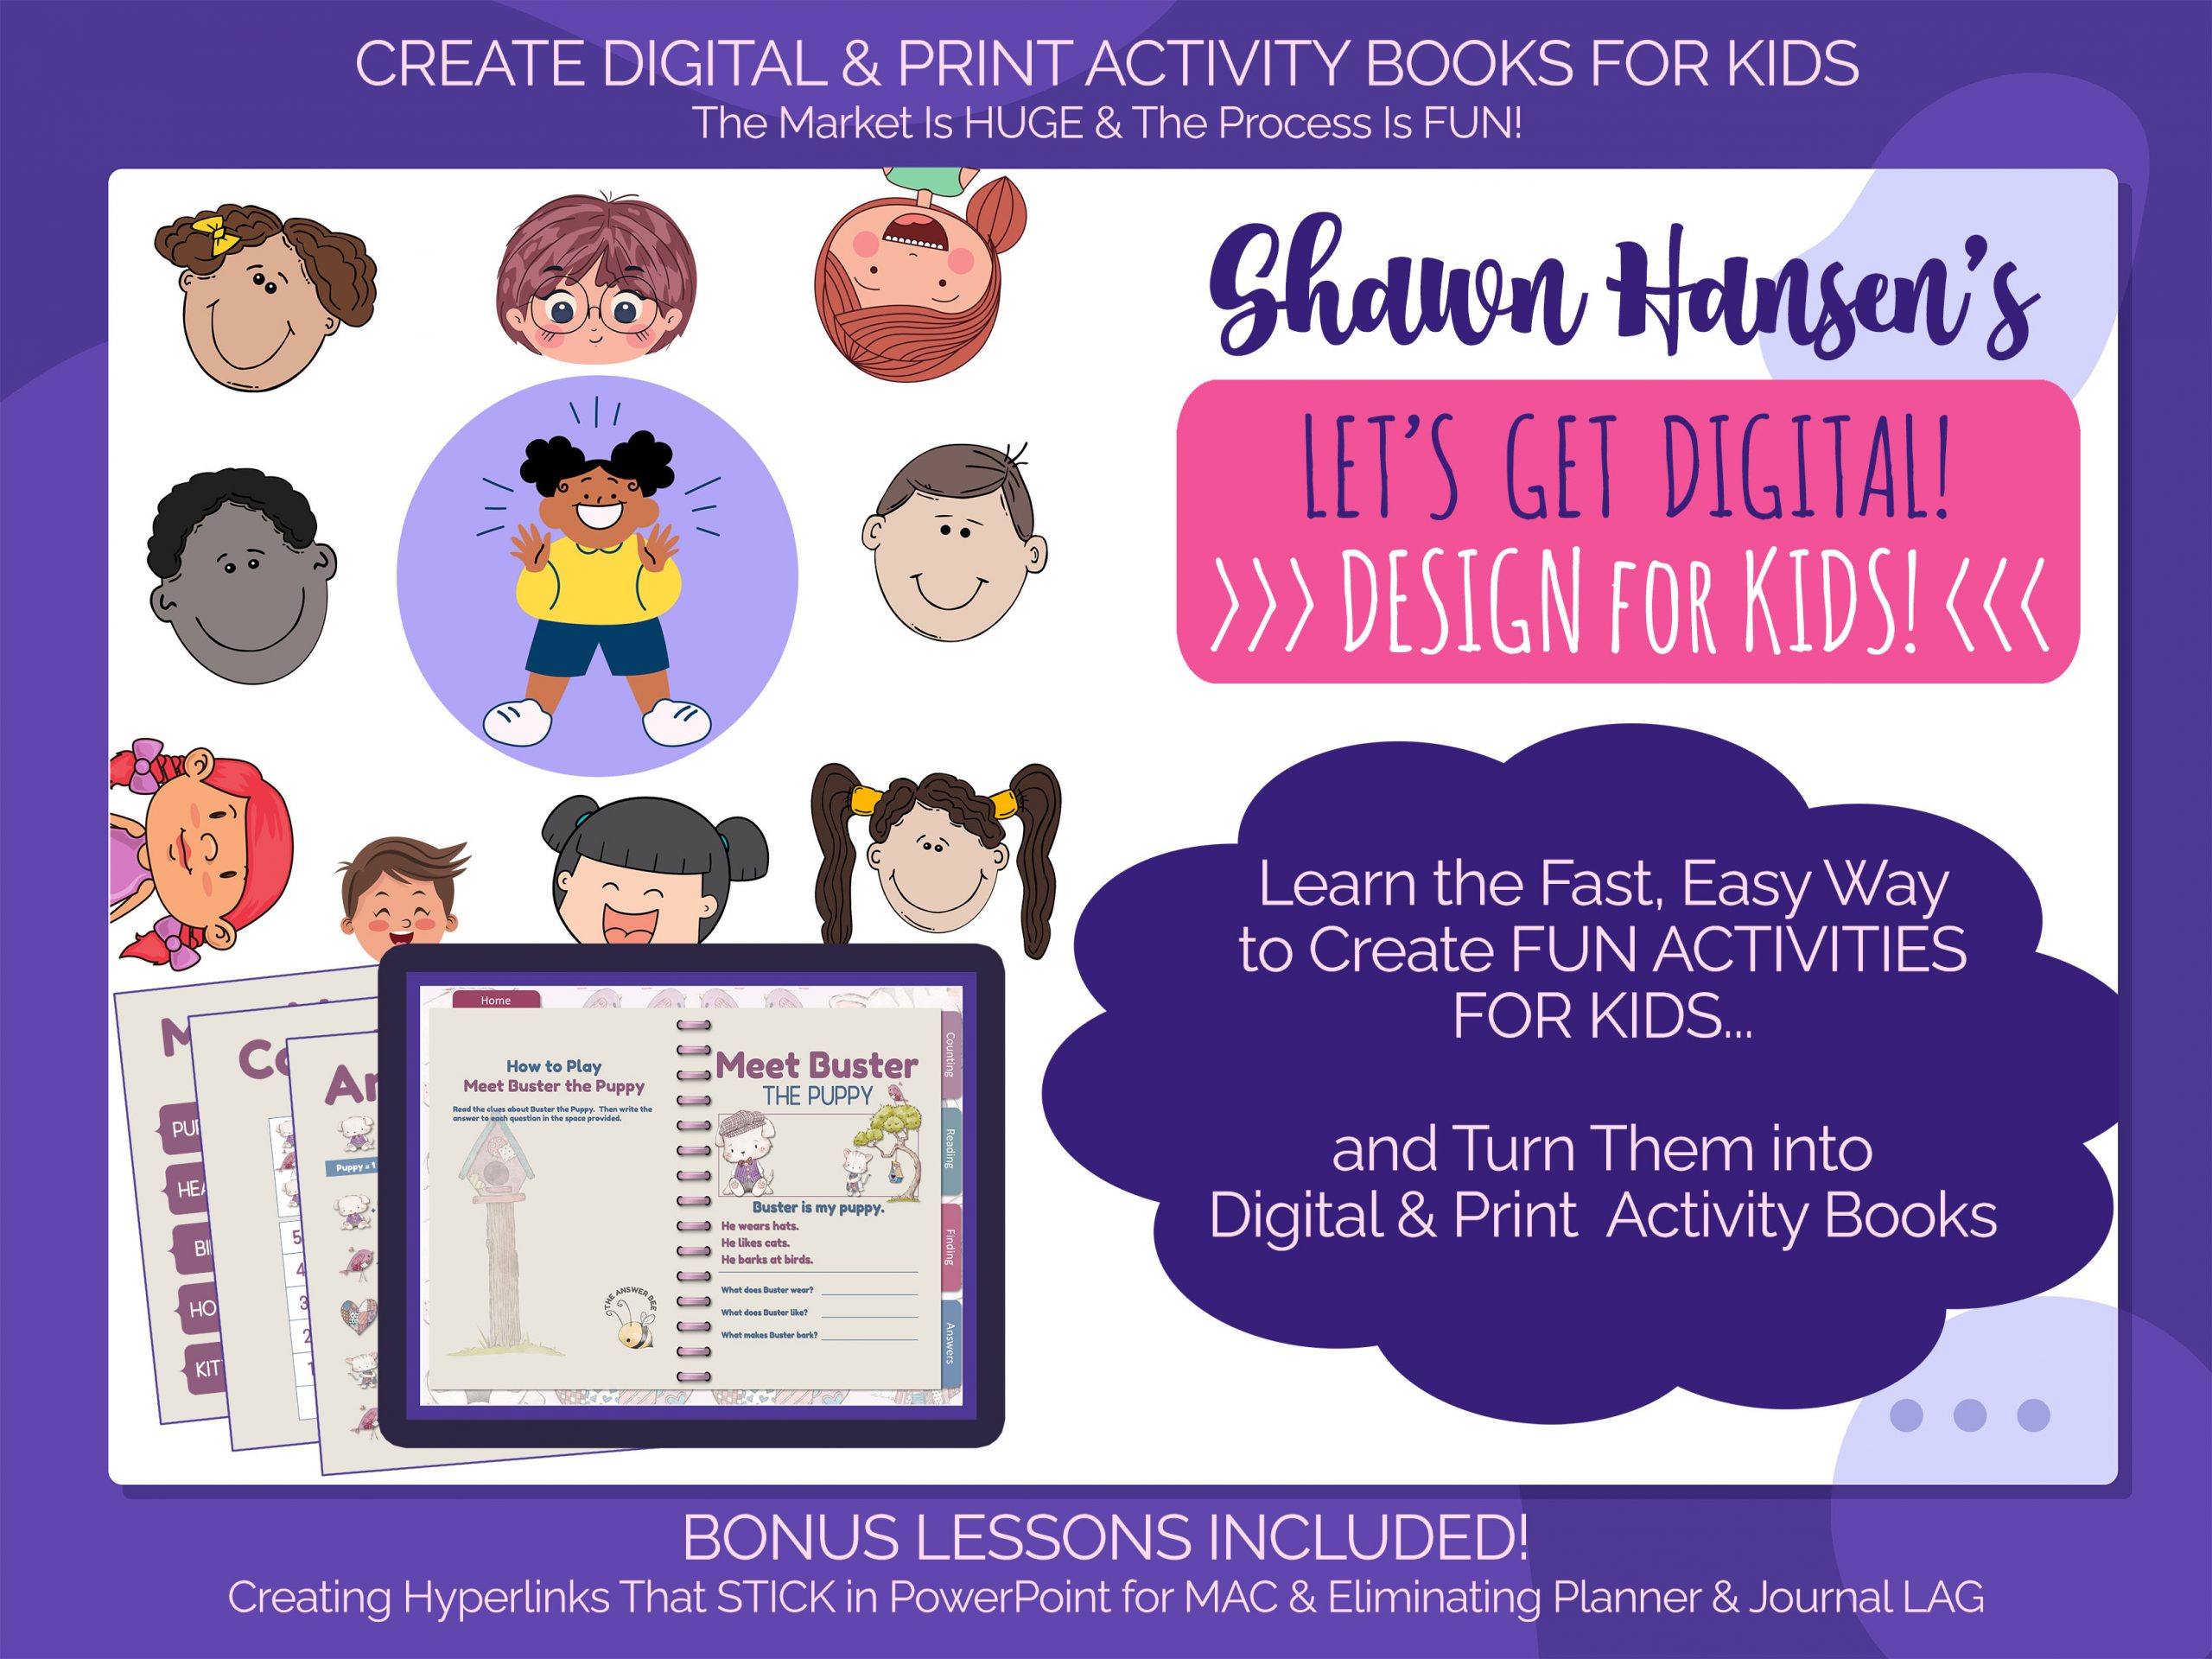 C'mon...you KNOW you want to Get Digital and Design for Kids!